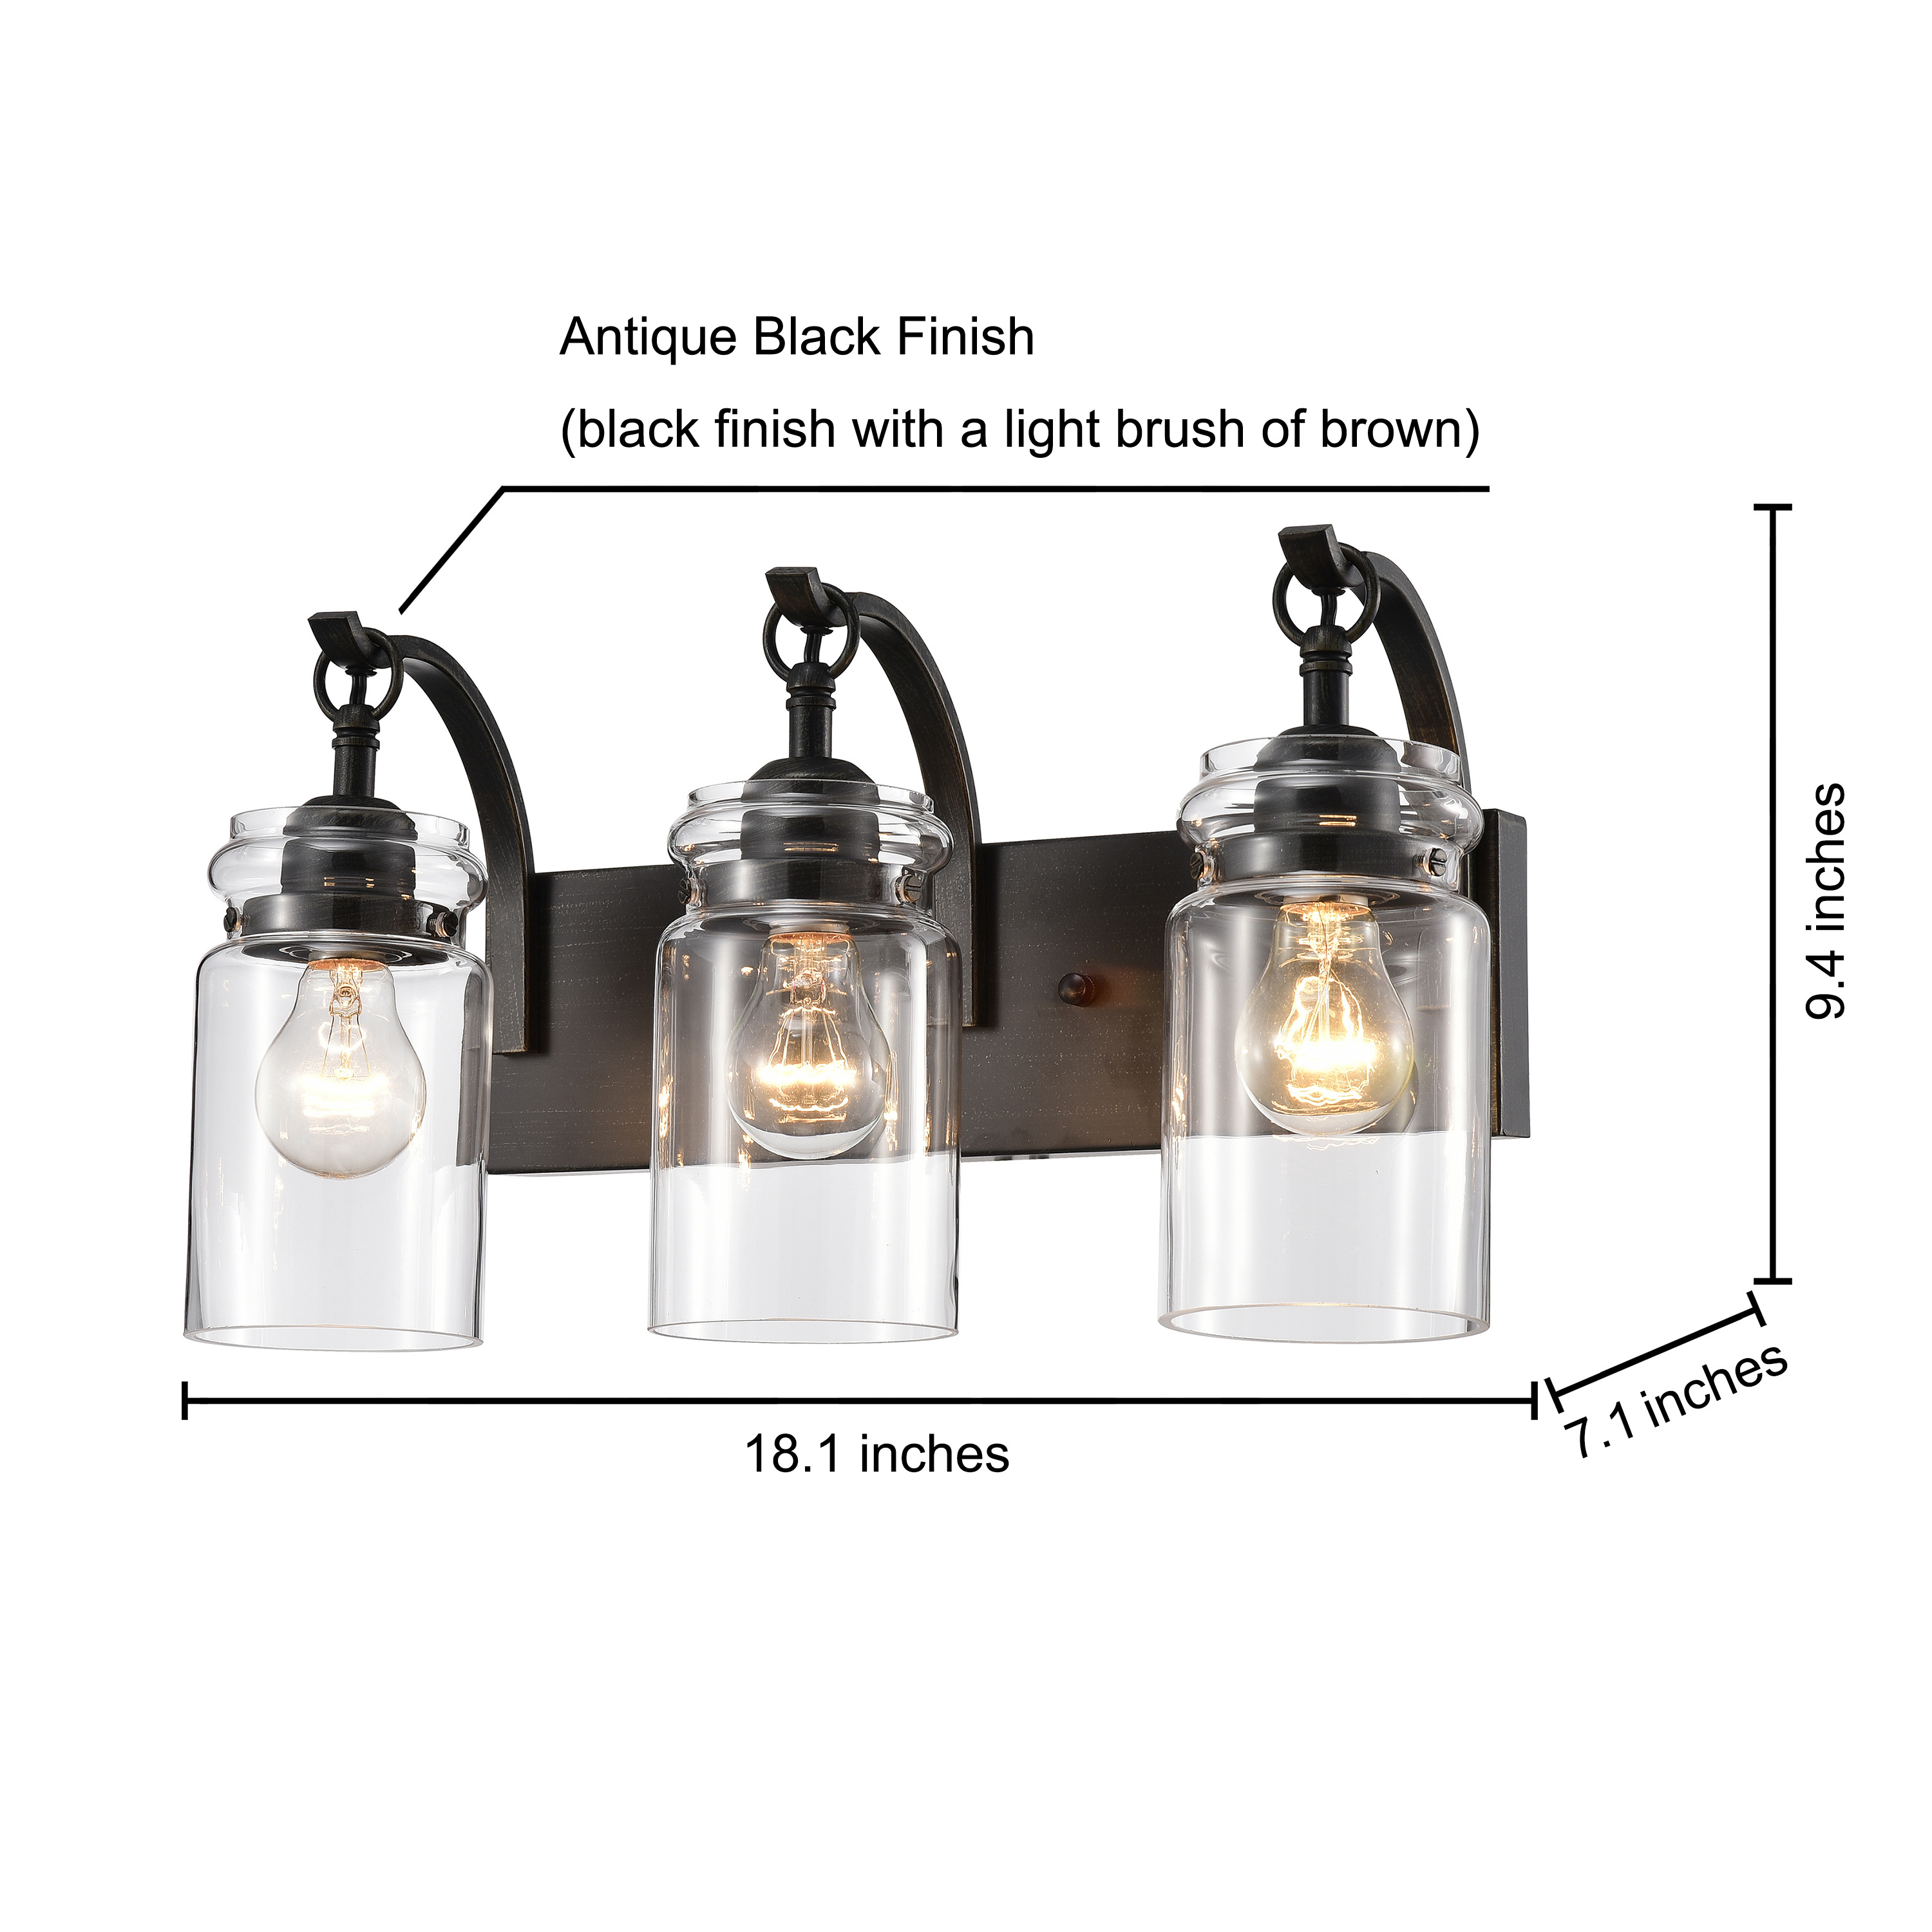 Anastasia Antique Black 3-Light Wall Sconce with Clear Glass Shade FD-4551-KAV